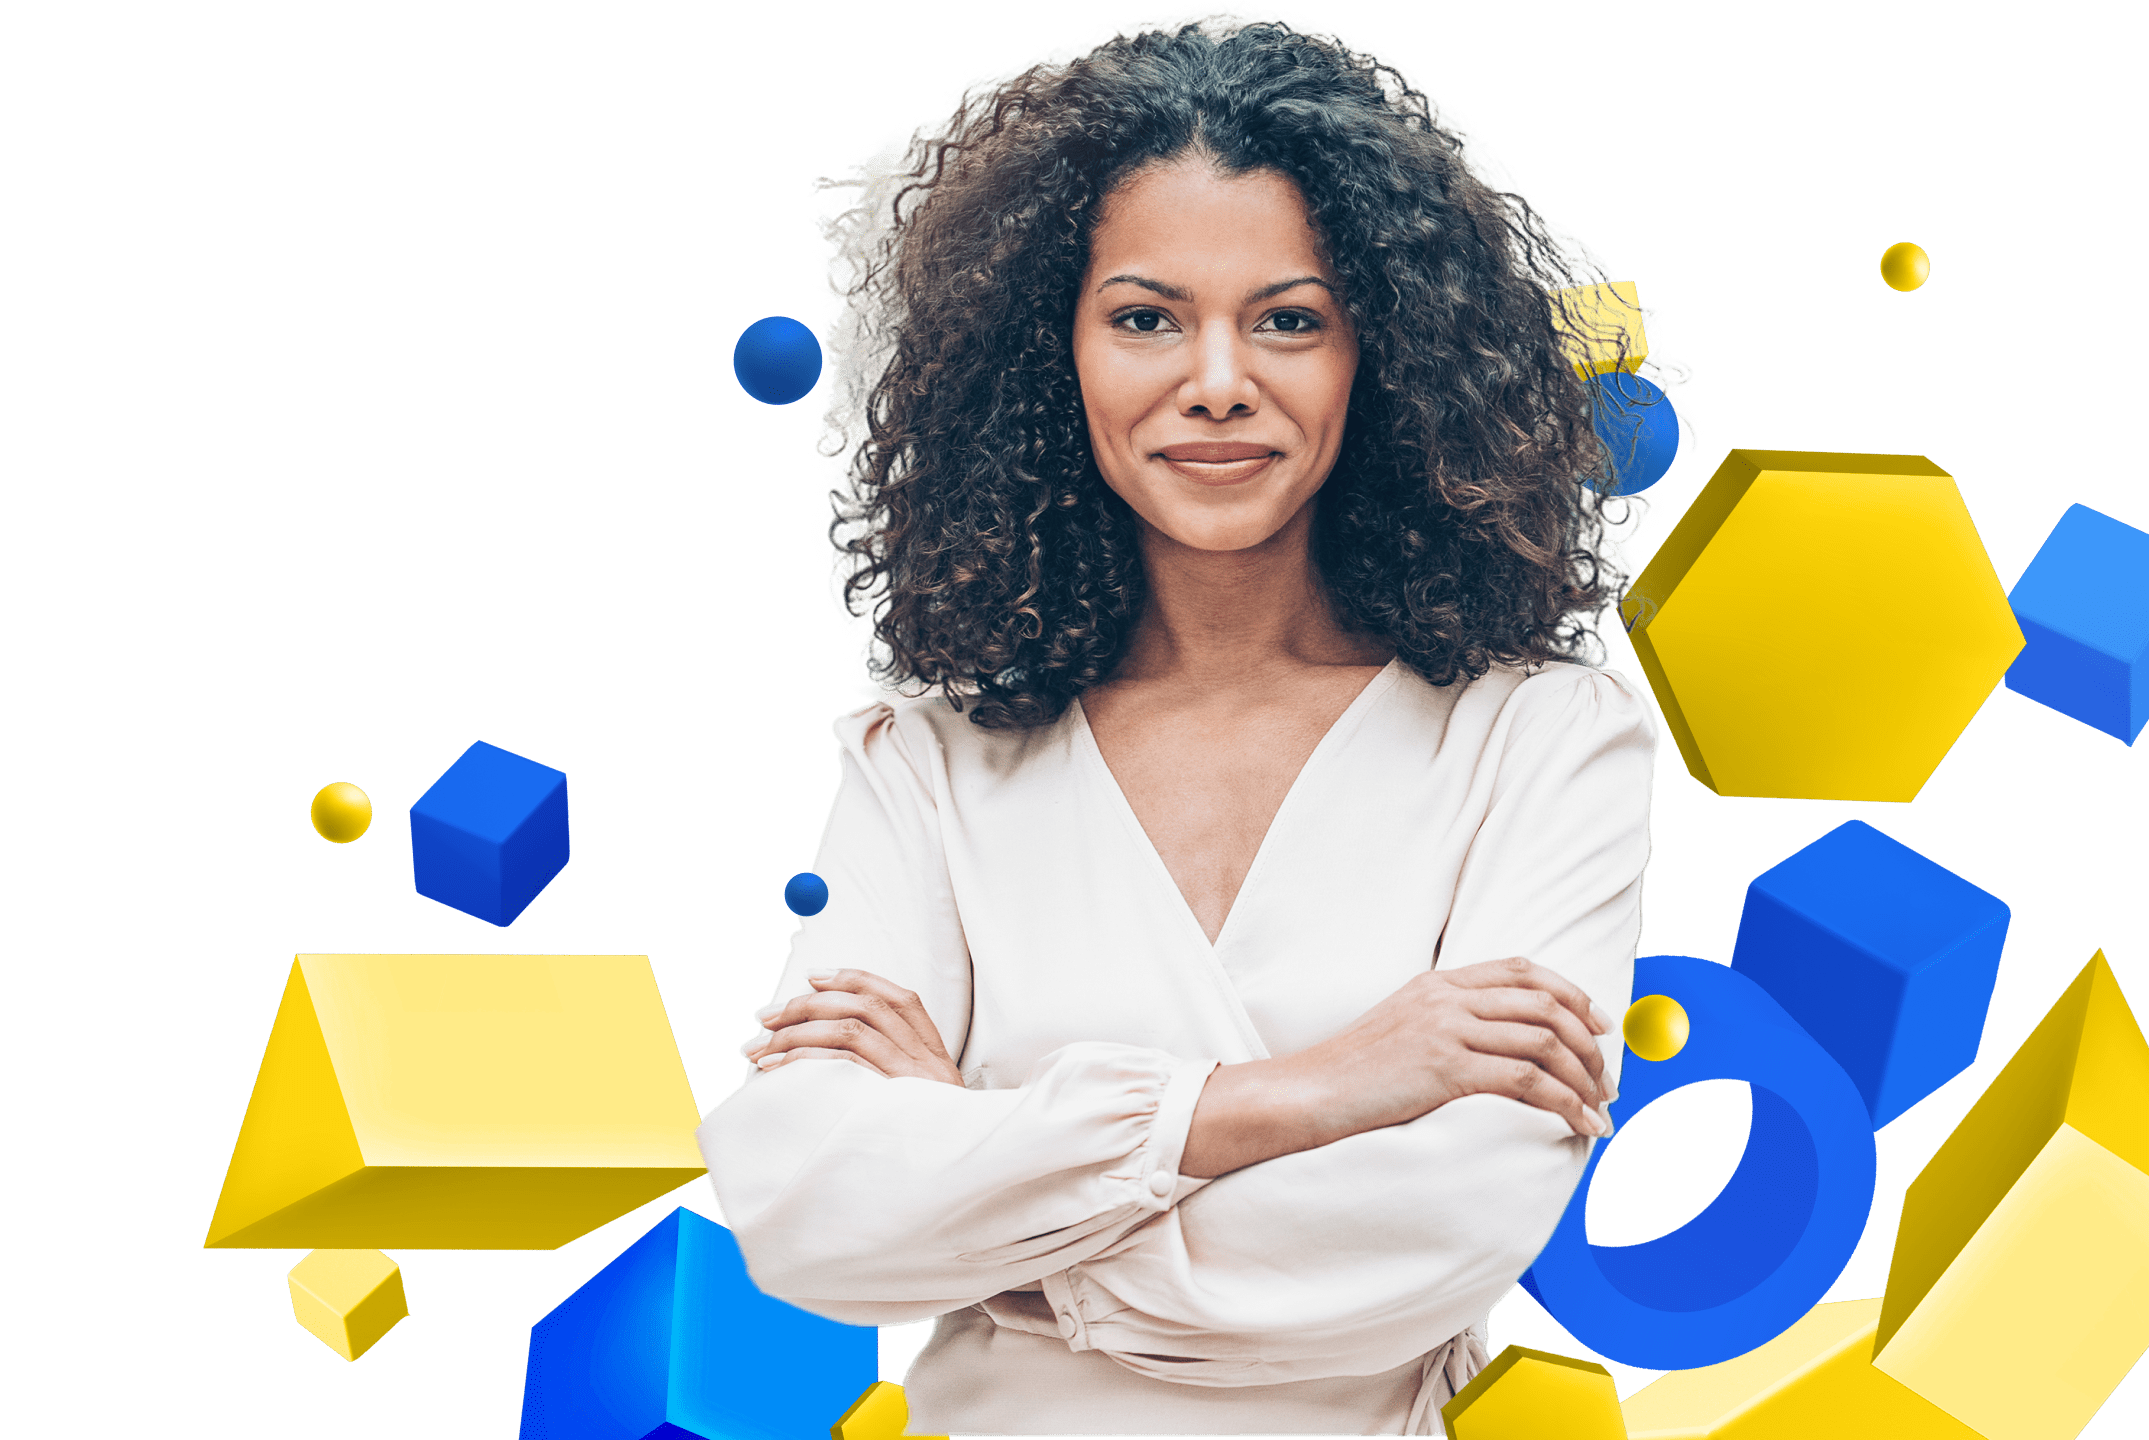 Image of a woman with her arms crossed in front of blue and yellow graphics on Skill Developers' website